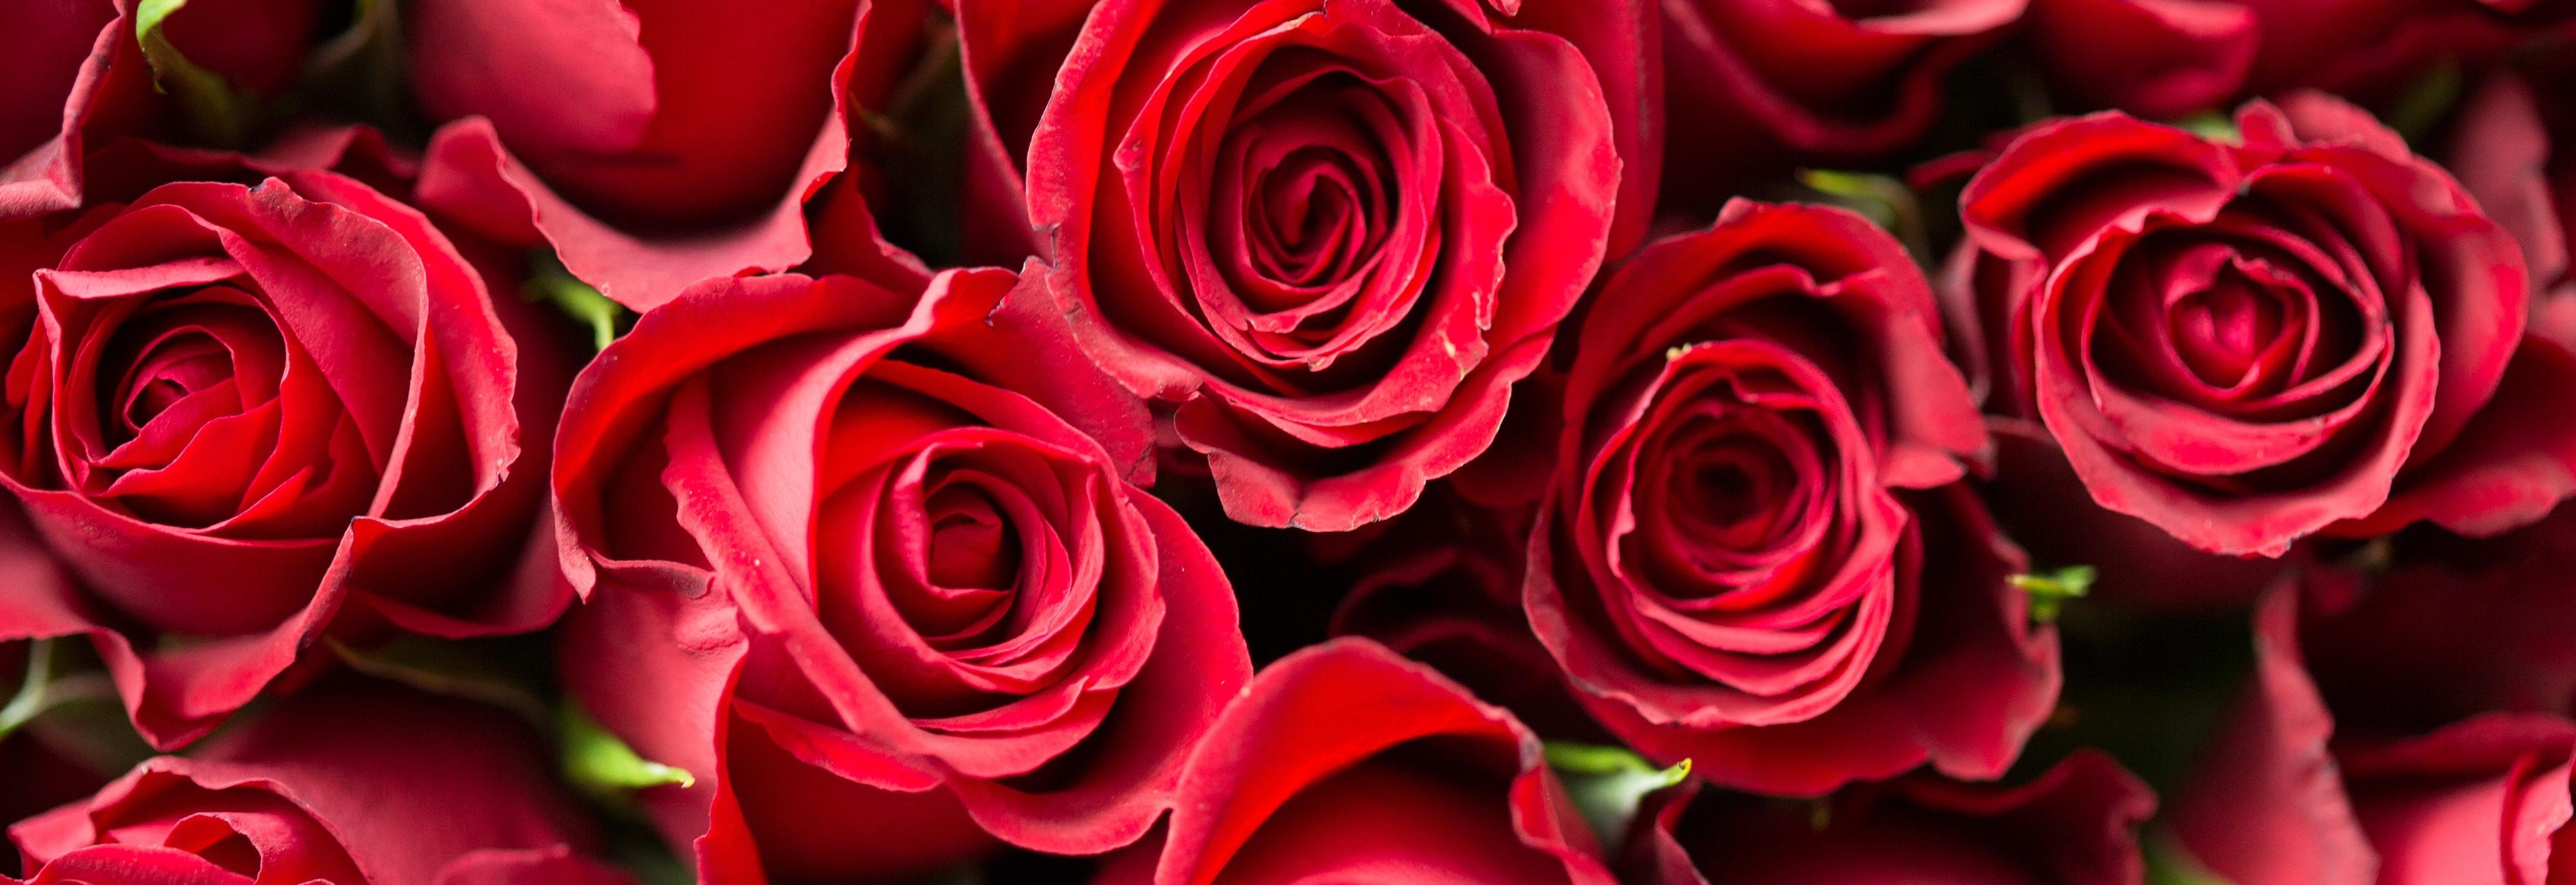 Valentine's Day Gift Roses | Find the perfect gift for that special person in your life.